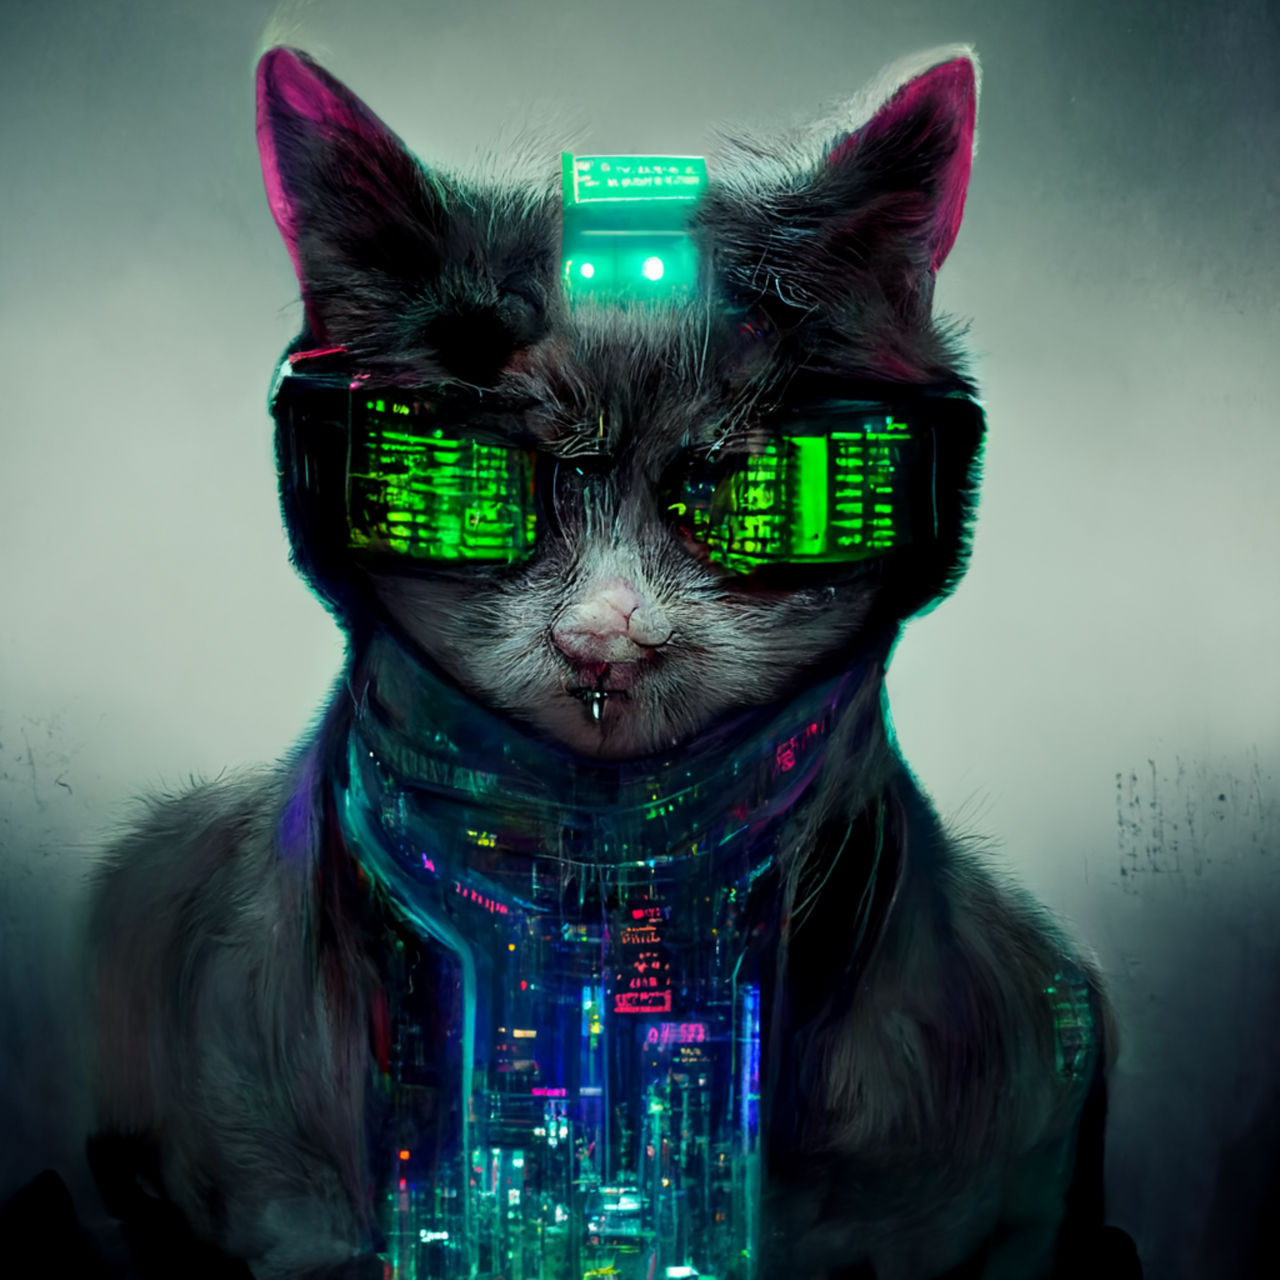 Qwerty - The Cyber Cat by thelofidragon on DeviantArt